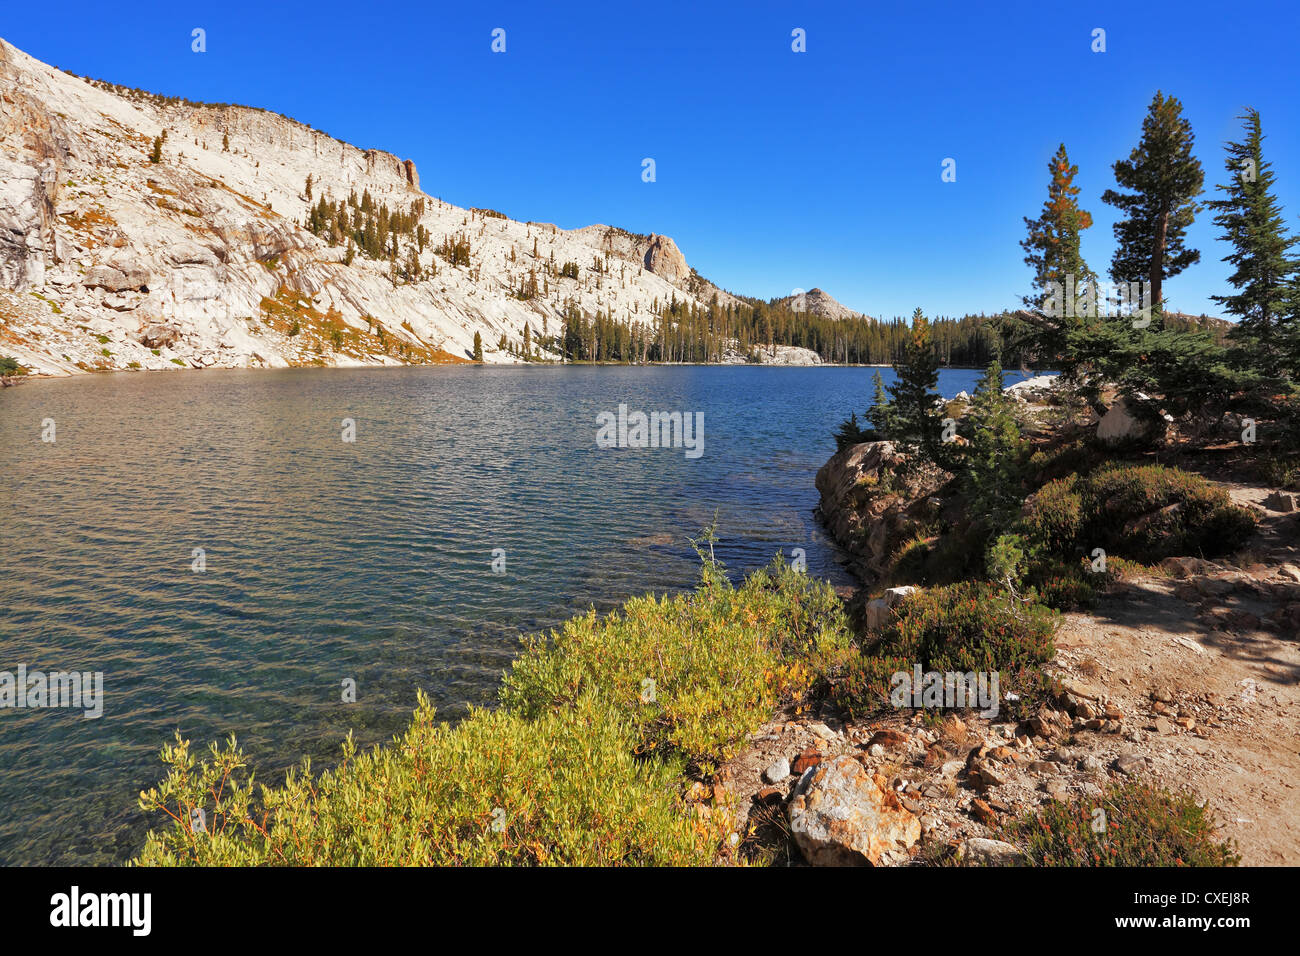 The lake and fur-trees Stock Photo